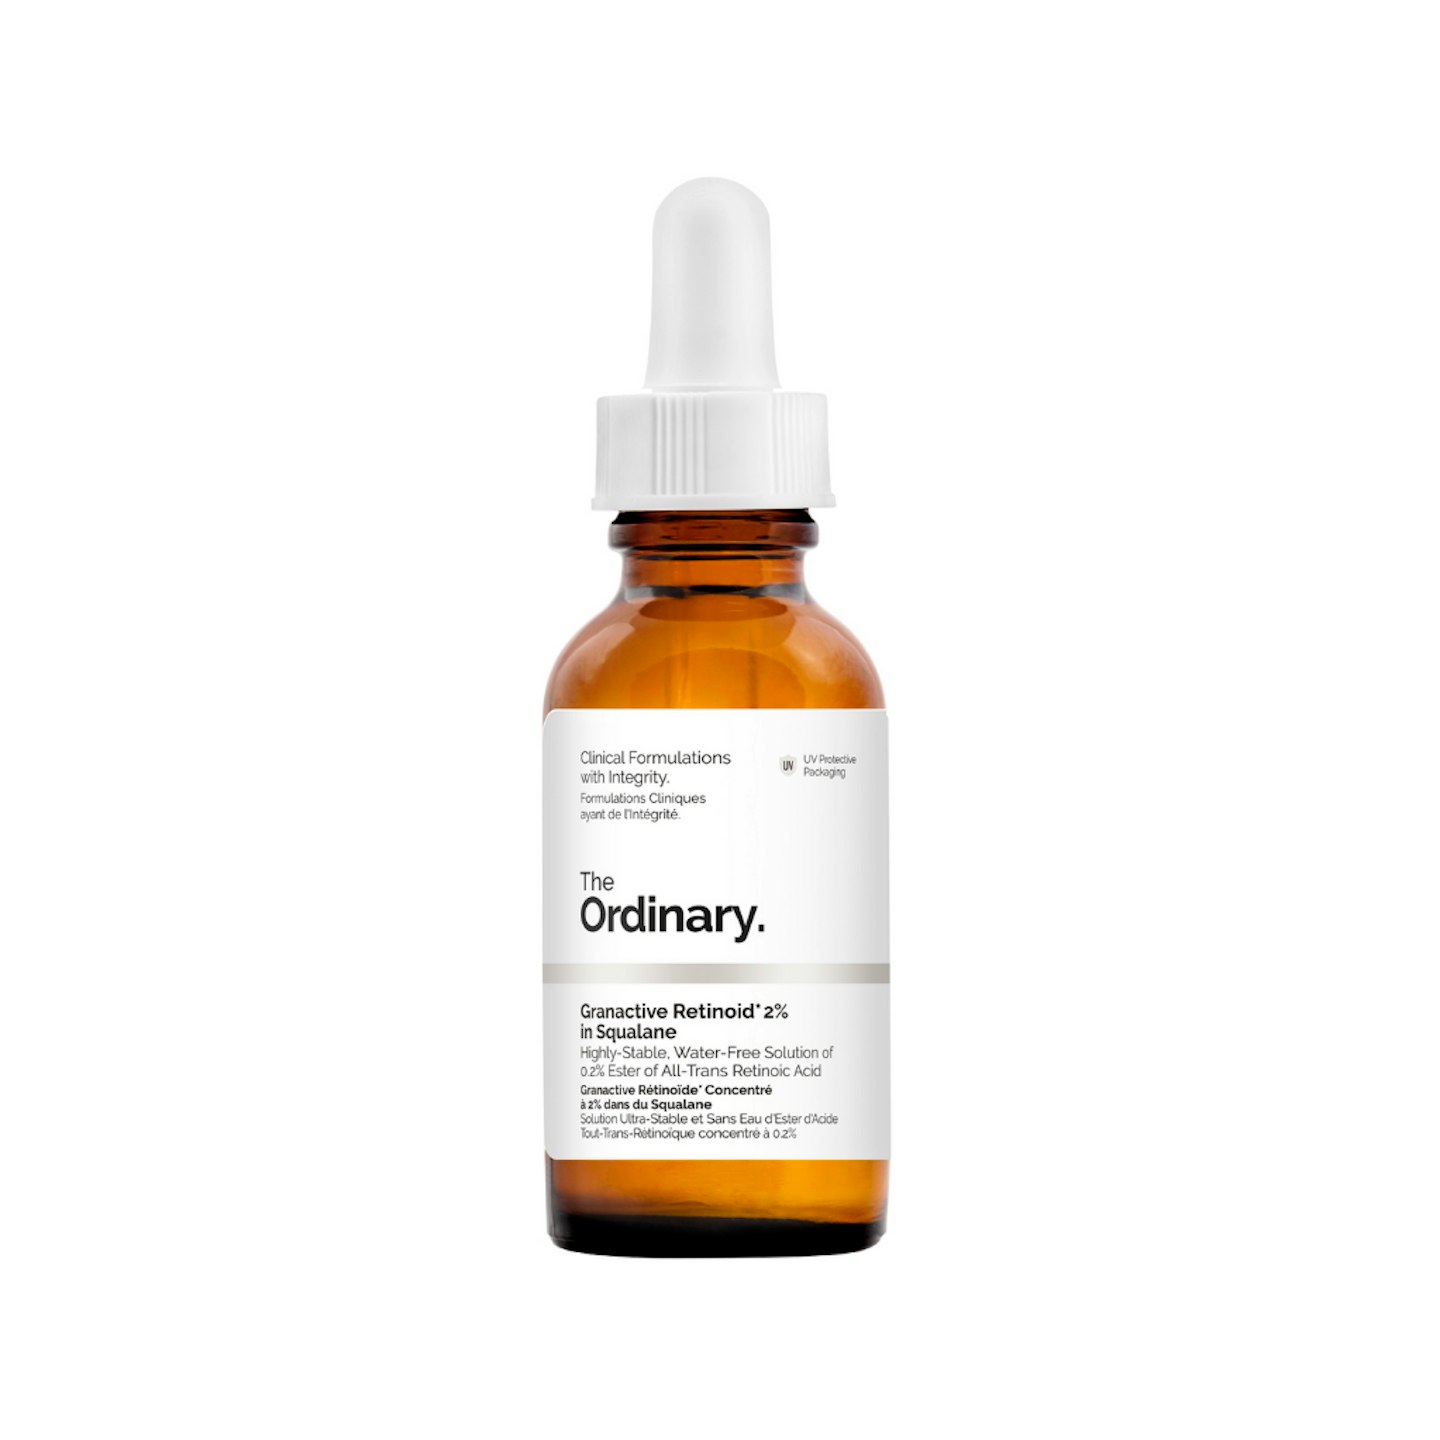 The ordinary products for normal skin